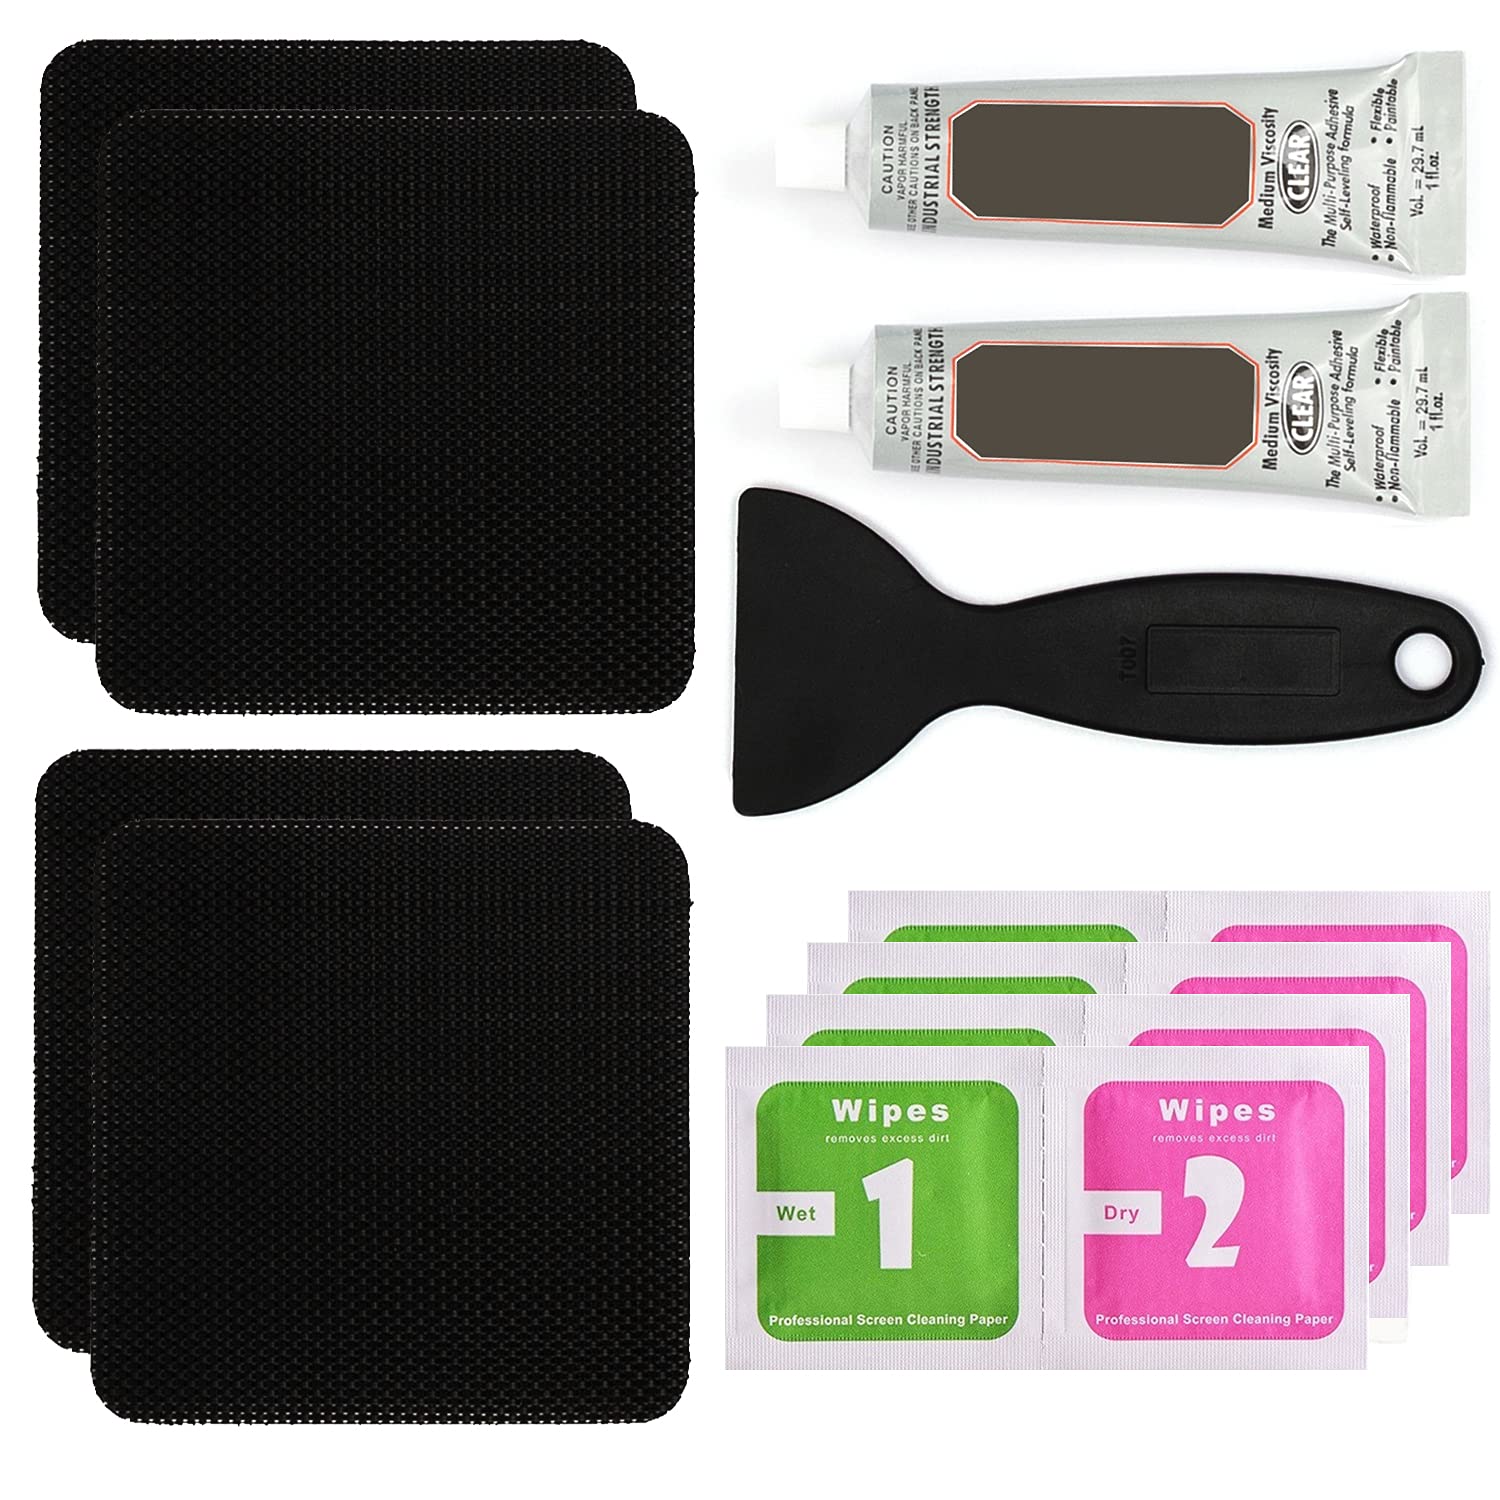 ifeolo Trampoline Patch Repair Kit 4X 4 Square On Patches Repair Trampoline Mat Tear Or Hole In A Trampoline Mat(4 Piece)